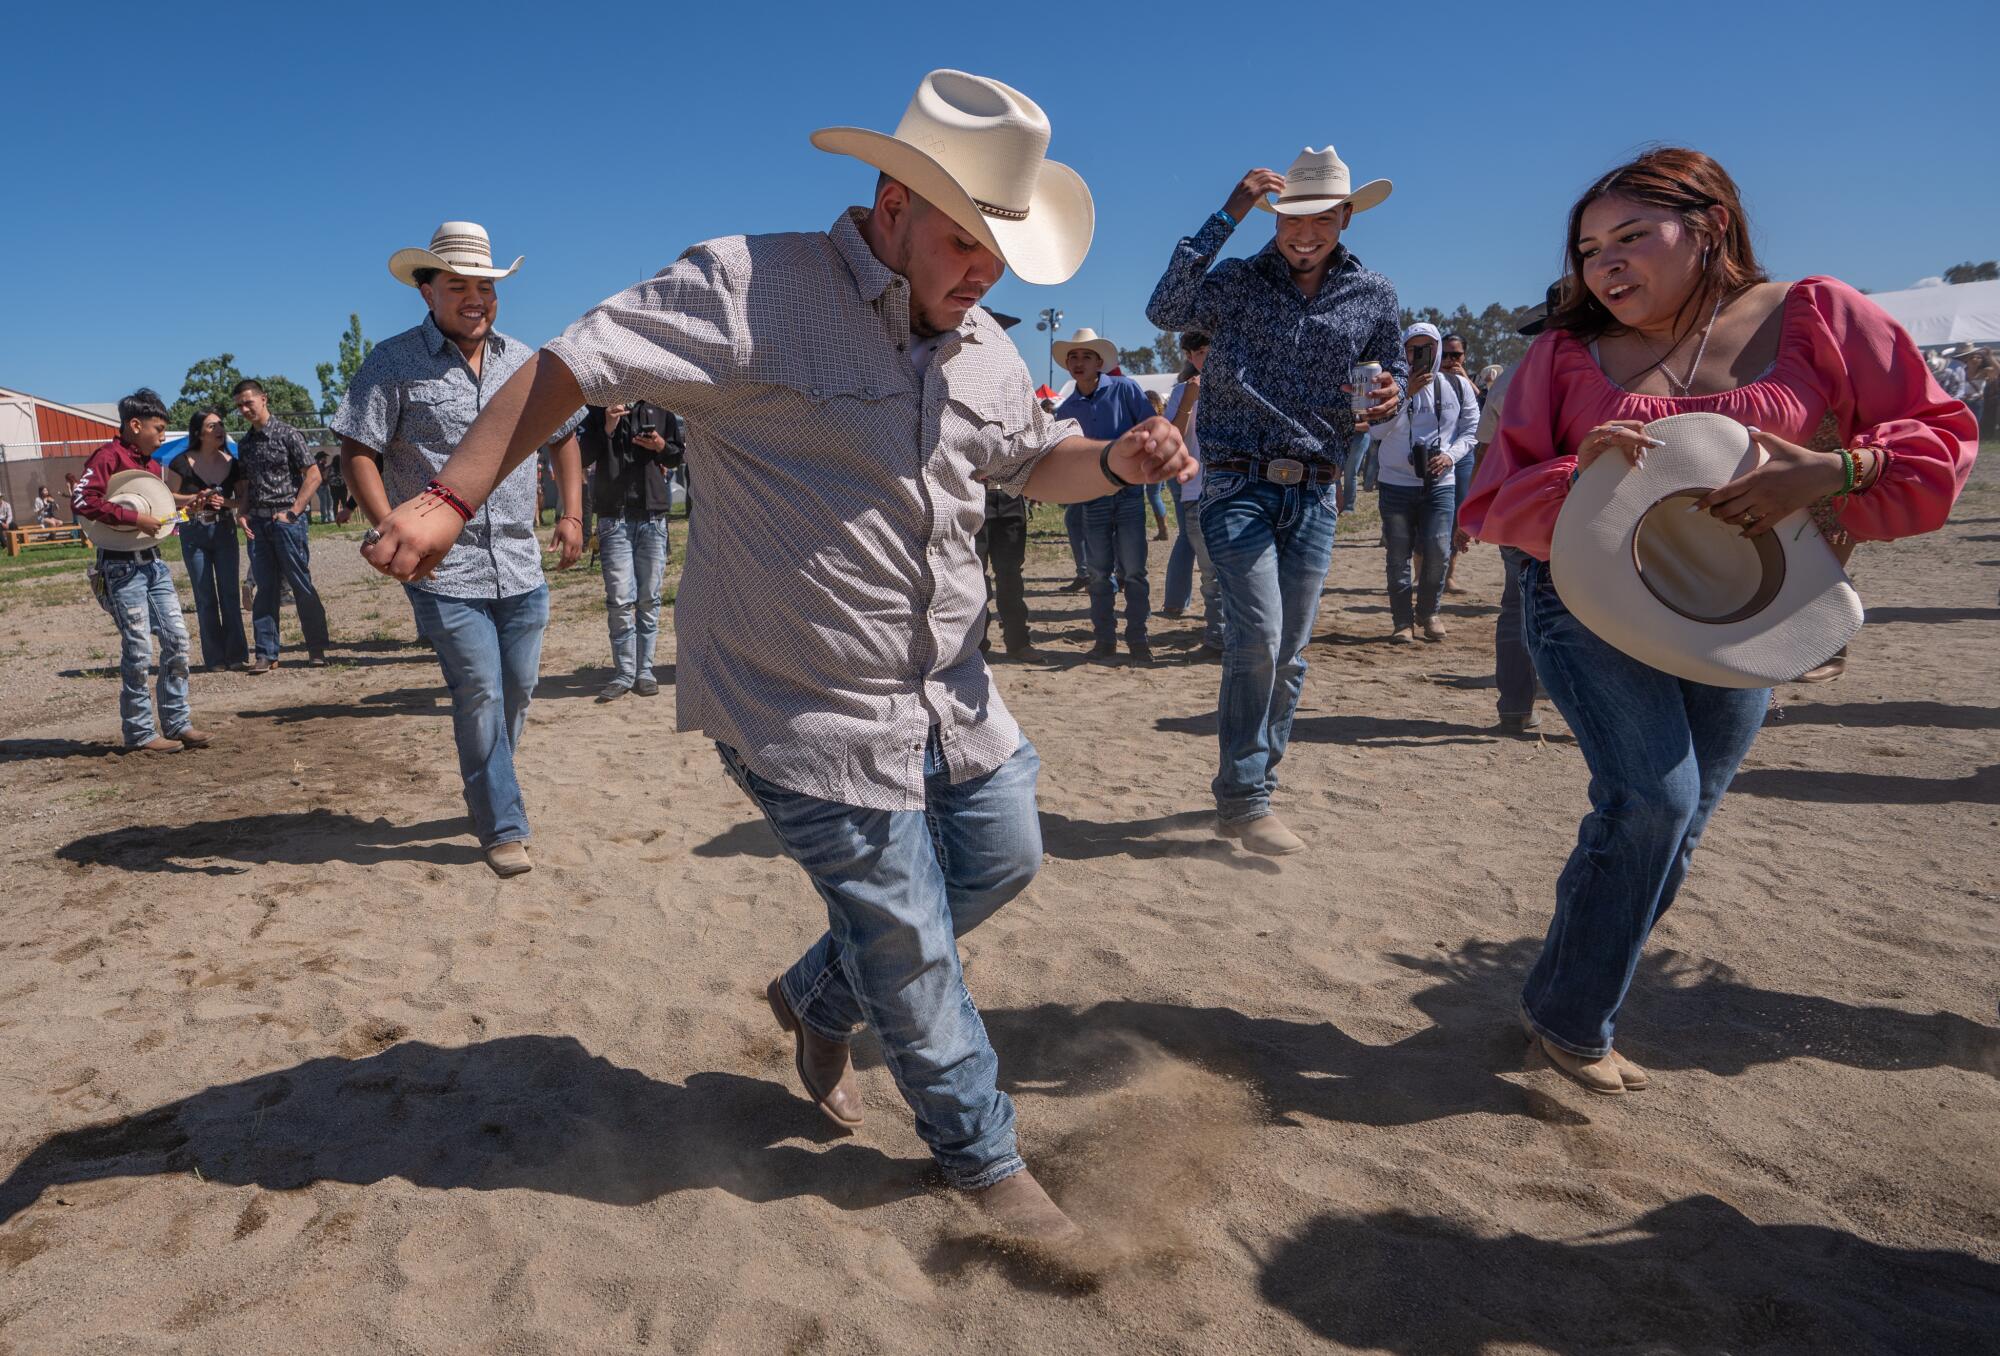 Attendees dance in cowboy hats and jeans dance in the dirt at a music festival.